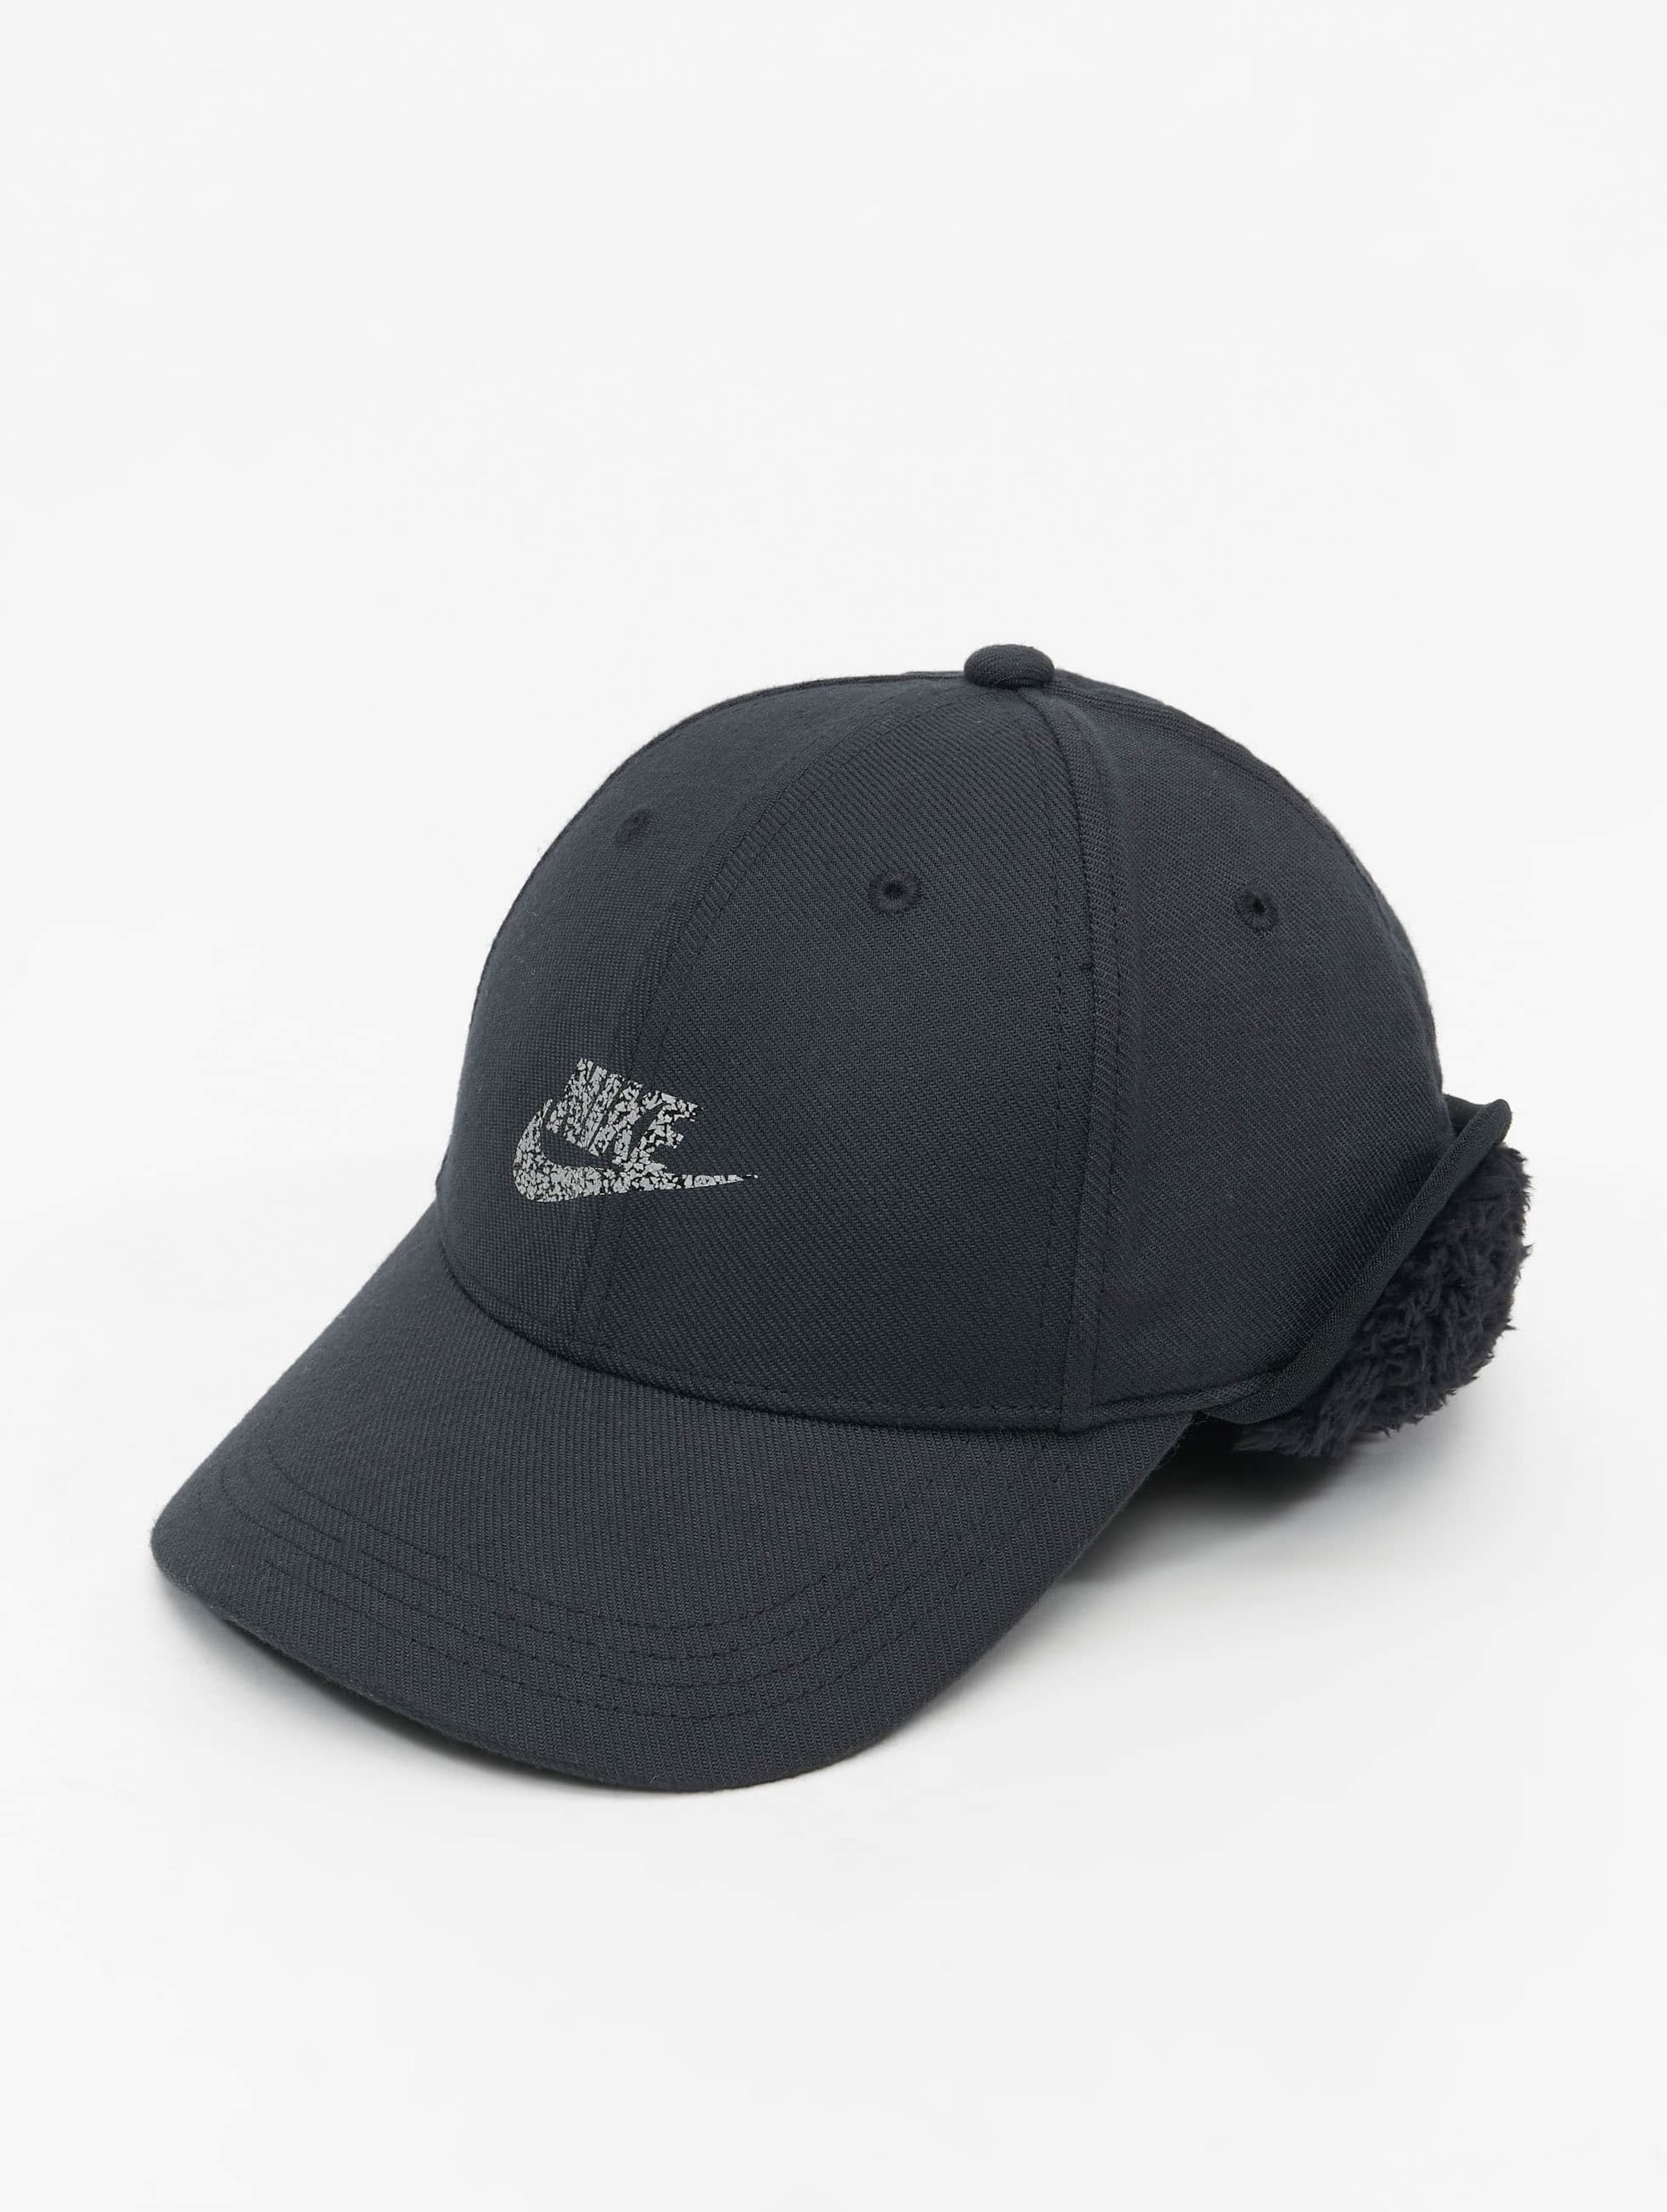 Order Nike Caps online with the lowest price guarantee